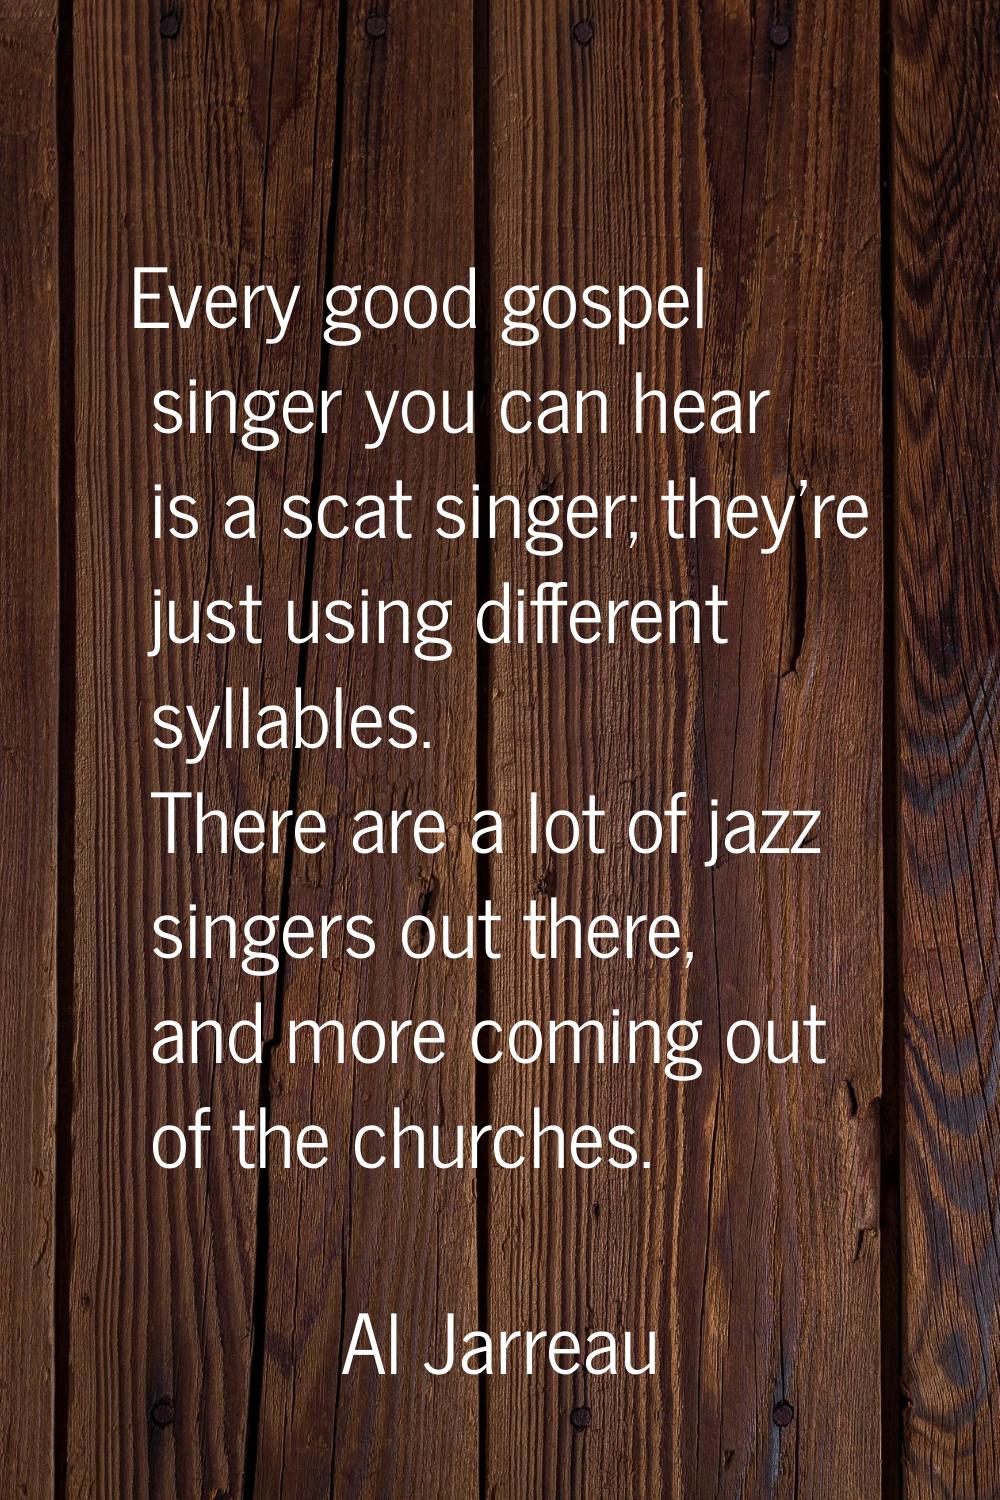 Every good gospel singer you can hear is a scat singer; they're just using different syllables. The